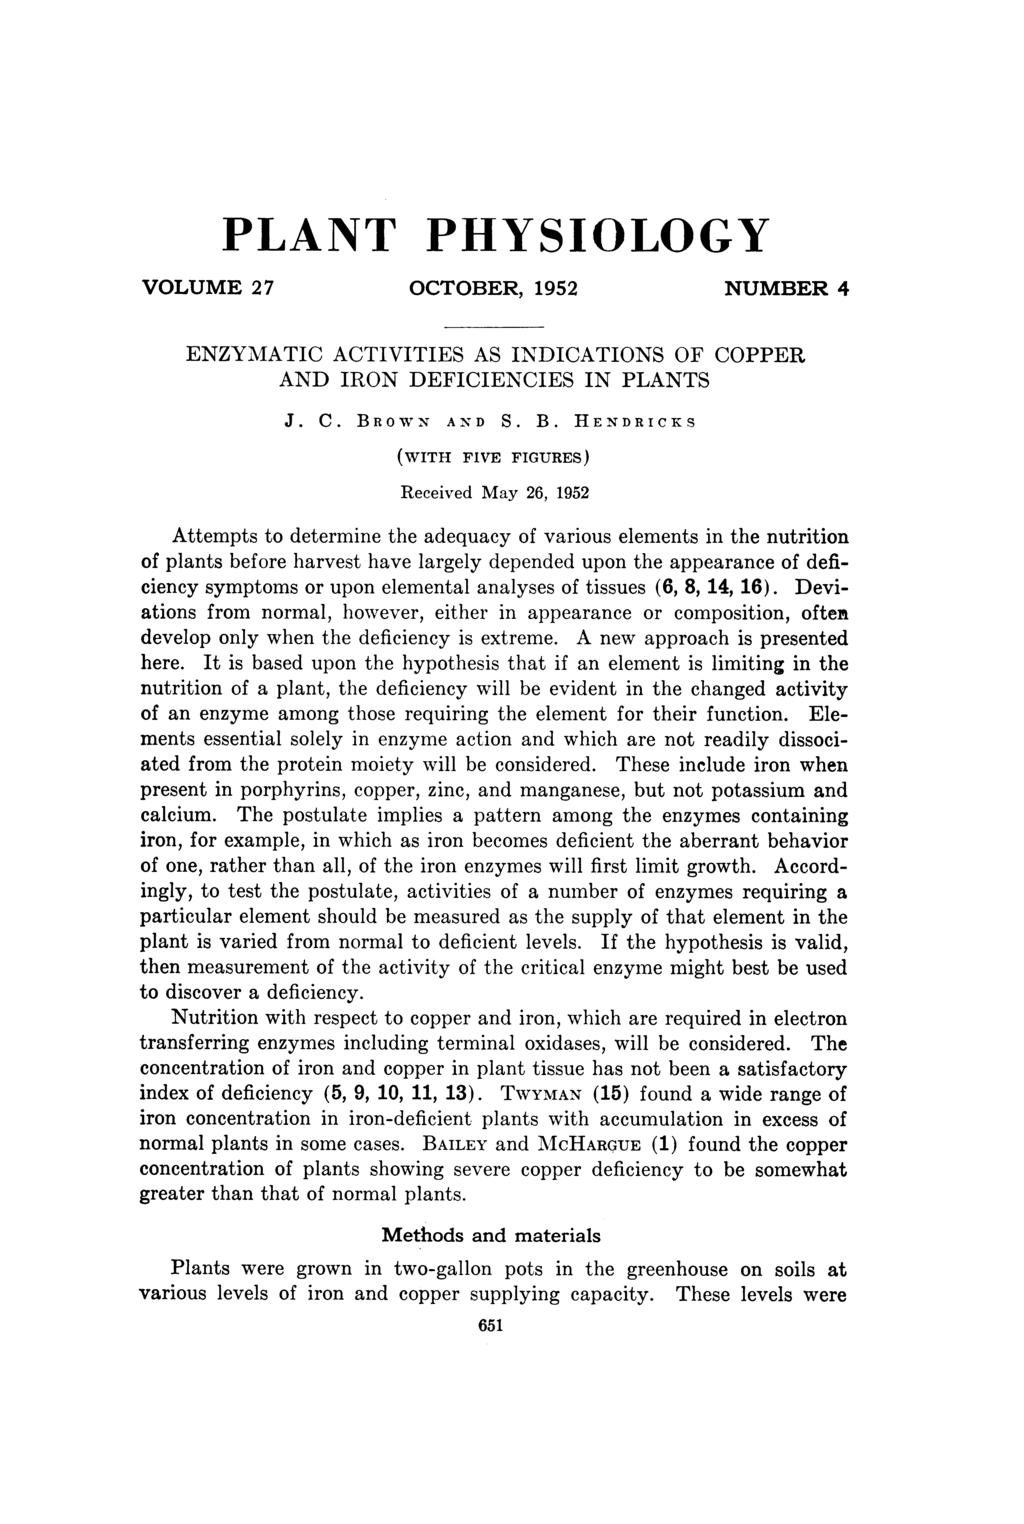 PLANT PHYSIOLOGY VOLUME 27 OCTOBER, 1952 NUMBER 4 ENZYMATIC ACTIVITIES AS INDICATIONS OF COPPER AND IRON DEFICIENCIES IN PLANTS J. C. BR